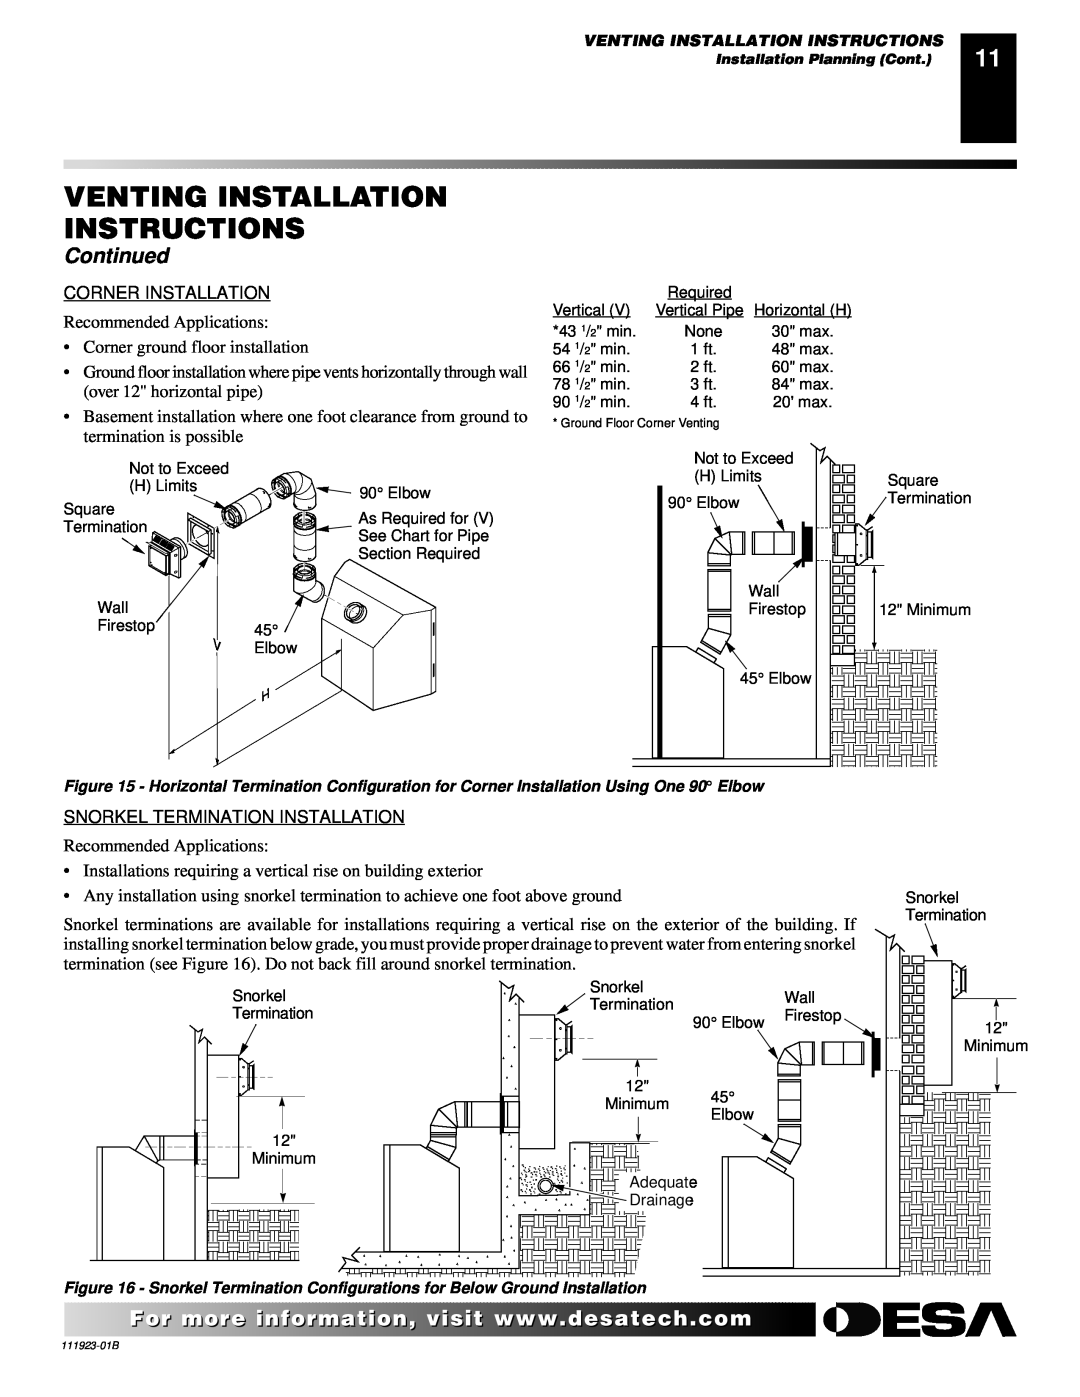 Desa (V)K36P SERIES, (V)K36N SERIES Venting Installation Instructions, Continued, Recommended Applications 